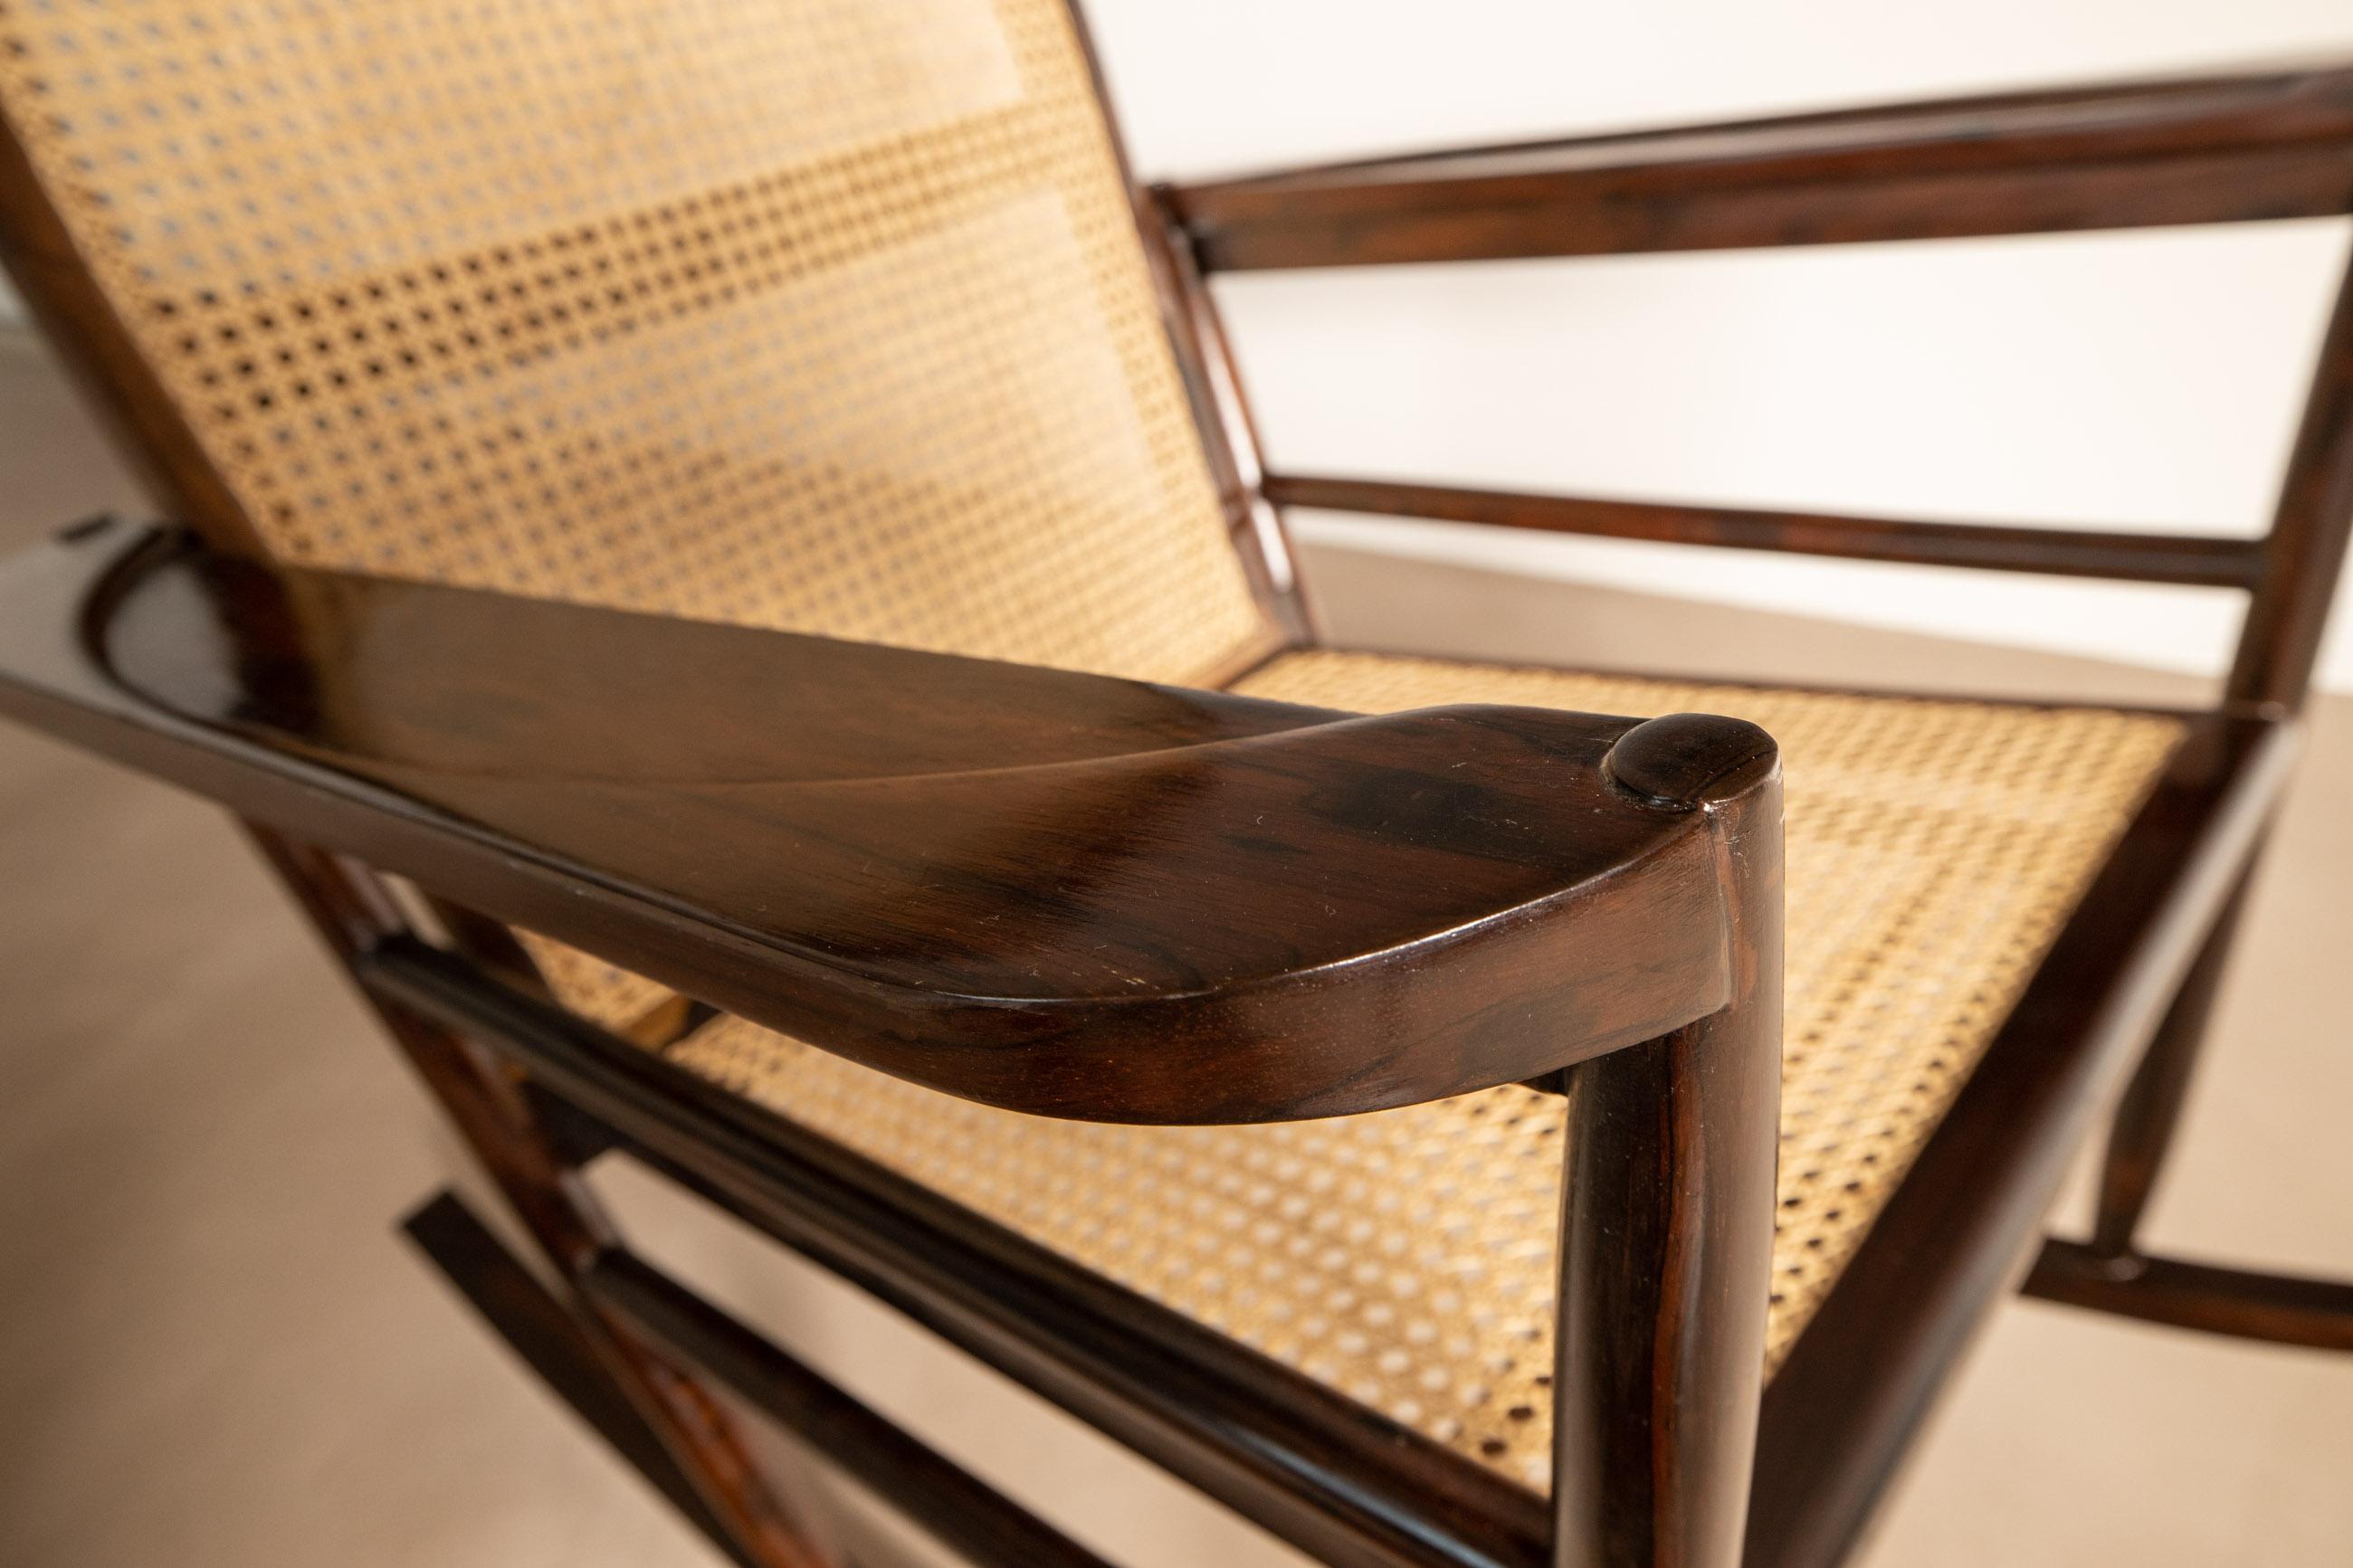 One of the first and important pieces in the Tenreiro production. Jacaranda structure, seat and back with cane.

Joaquim Tenreiro was among leading furniture designers and visual artists in modernist Brazilian furniture making in the mid-20th